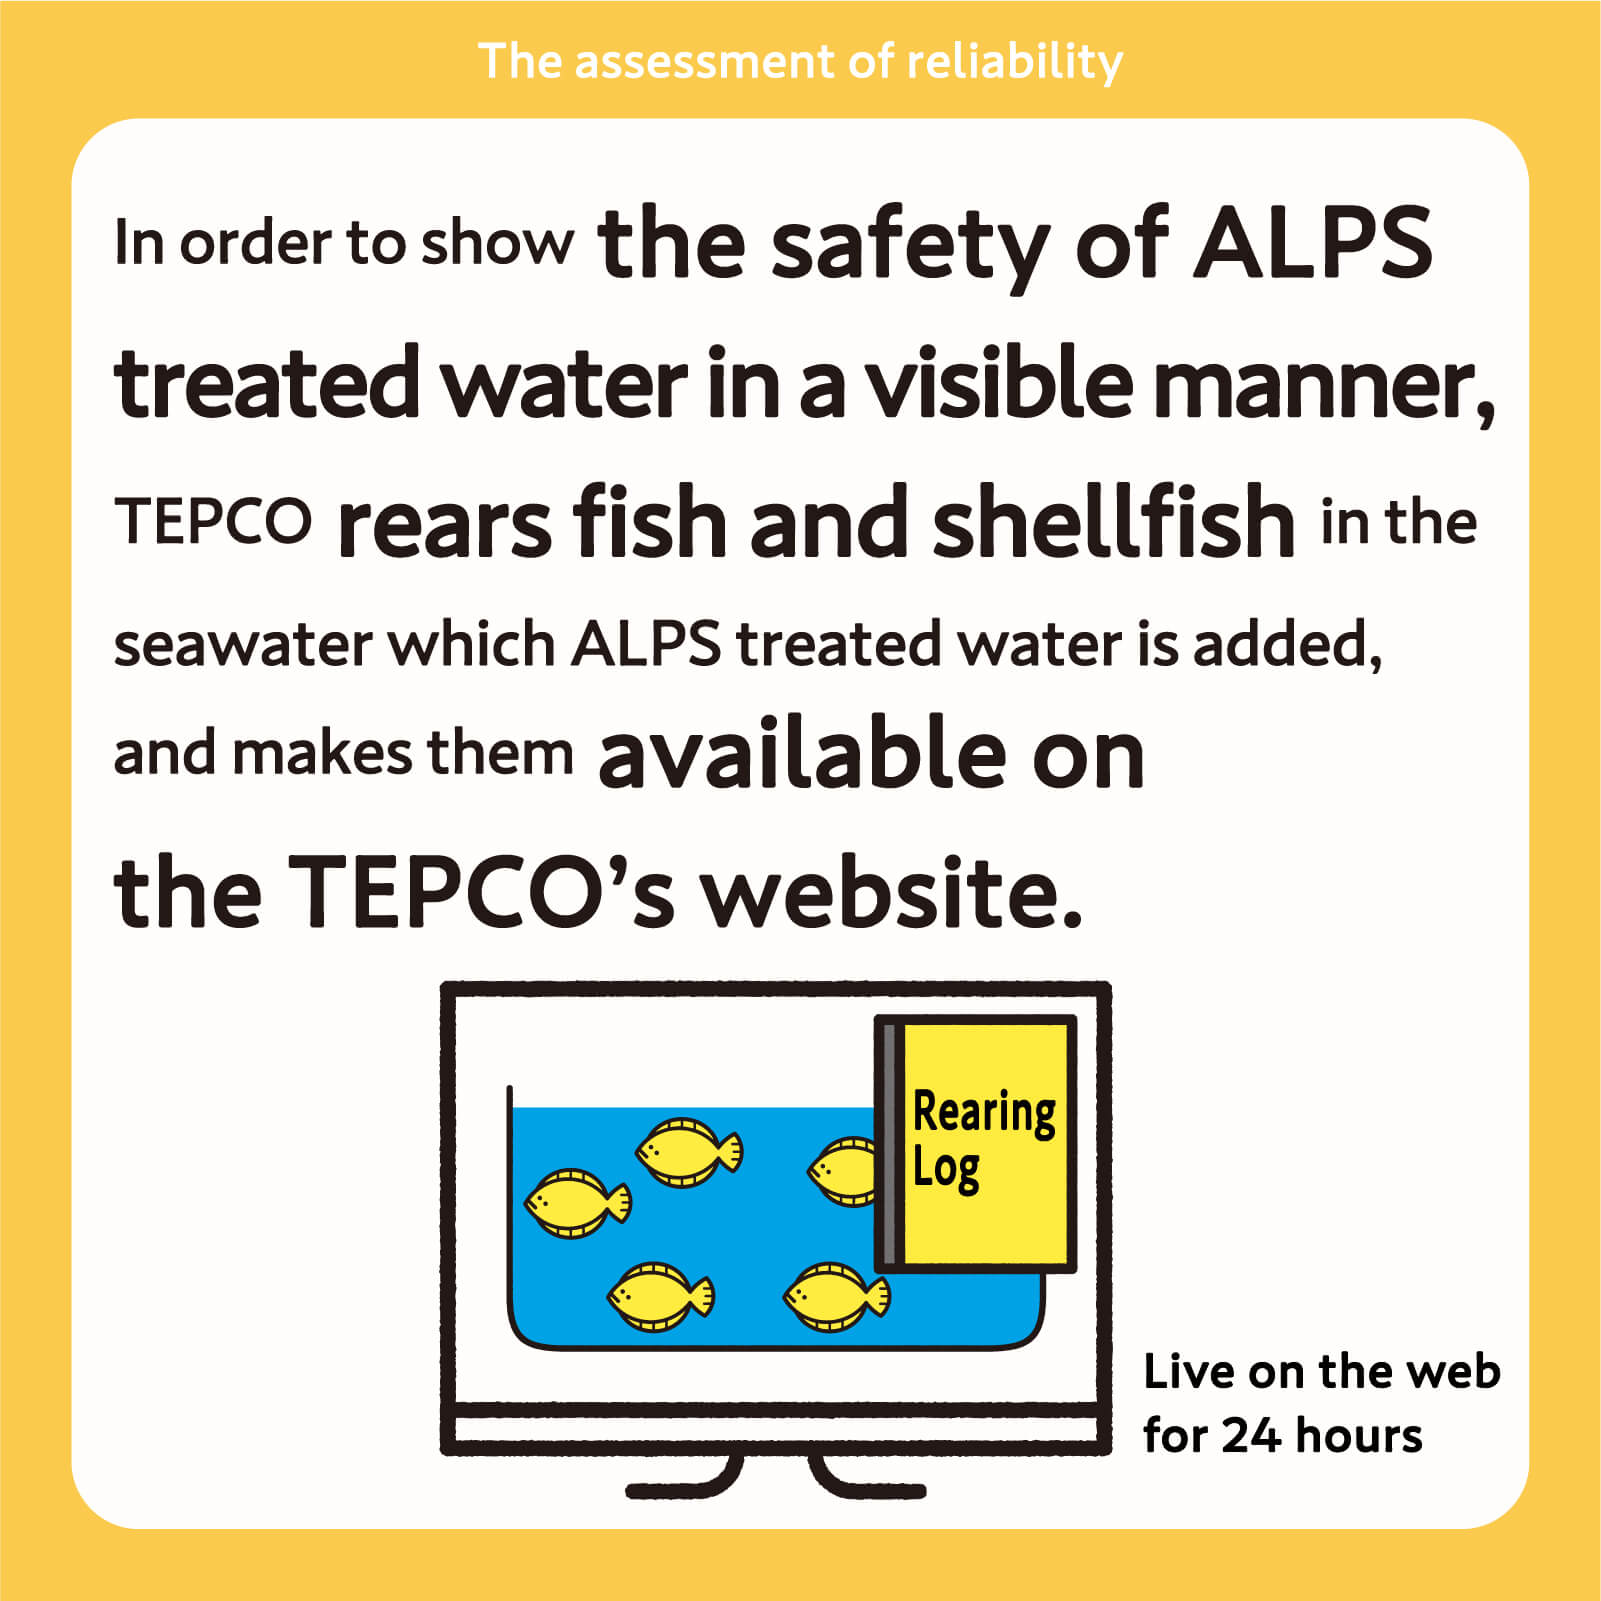 In order to show the safety of ALPS treated water in a visible manner, TEPCO rears fish and shellfish in the seawater which ALPS treated water is added, and makes them available on the TEPCO’s website.